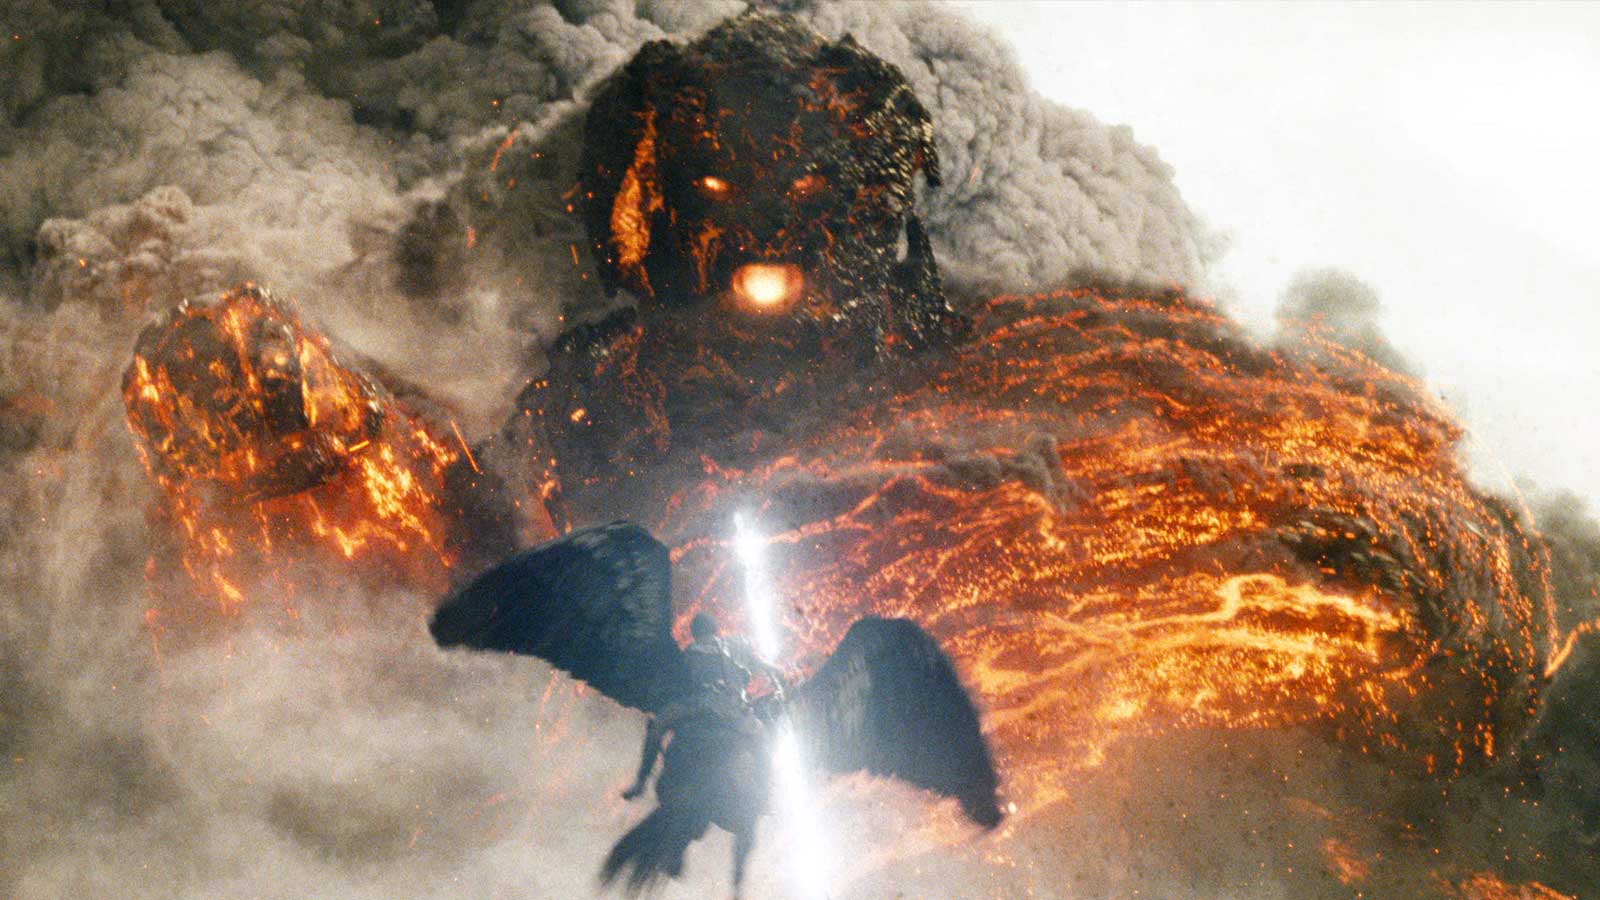 film_wrath_of_the_titans_1600x900_gallery_12-yes.jpg